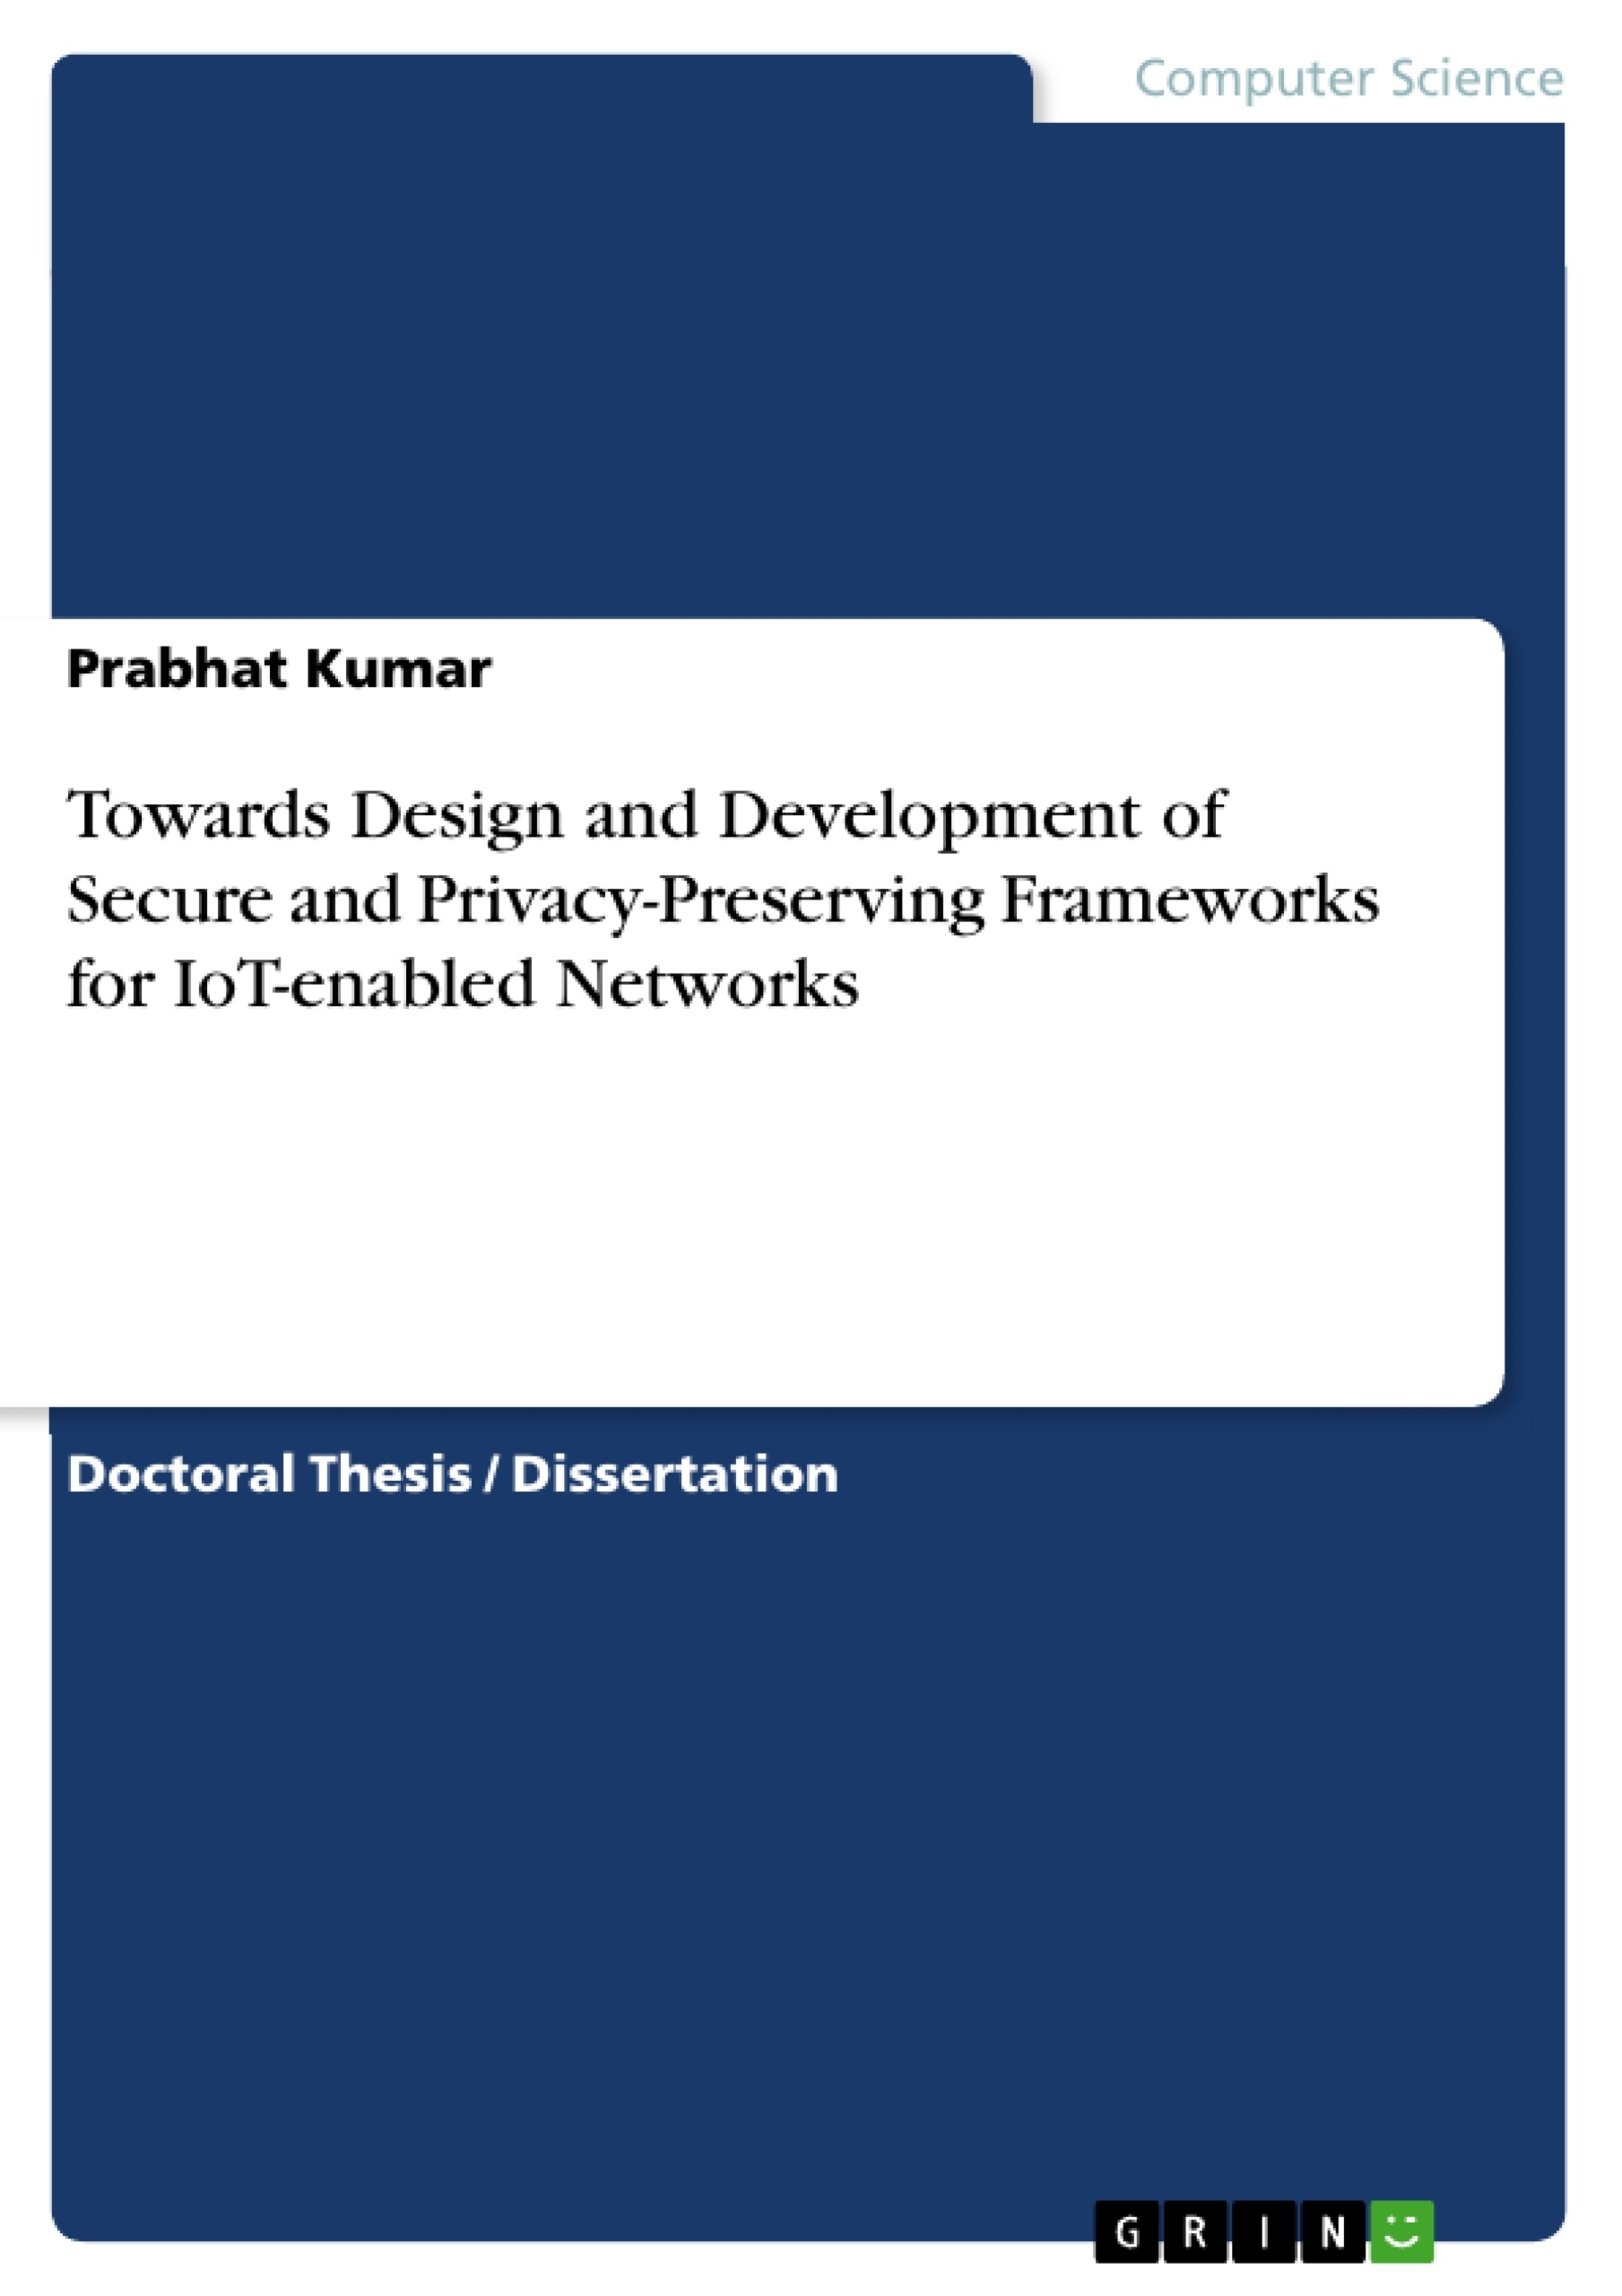 Título: Towards Design and Development of Secure and Privacy-Preserving Frameworks for IoT-enabled Networks